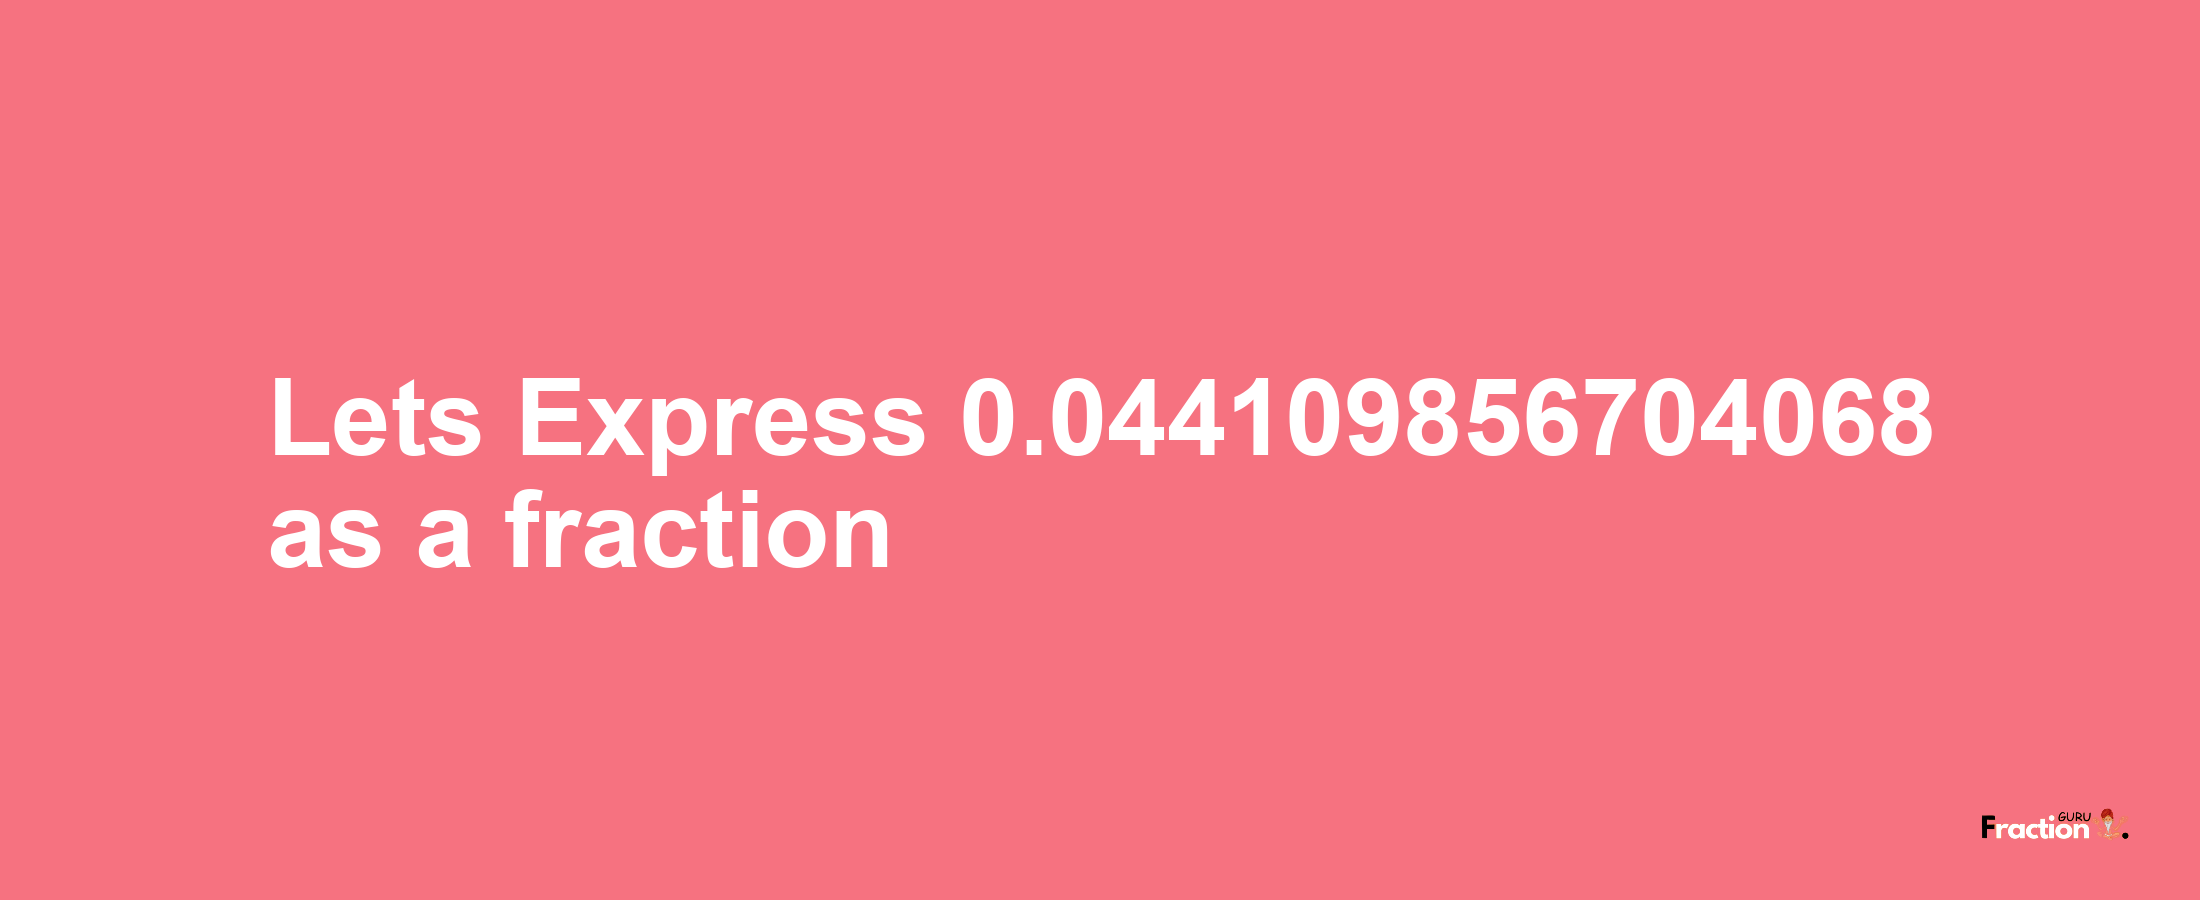 Lets Express 0.044109856704068 as afraction